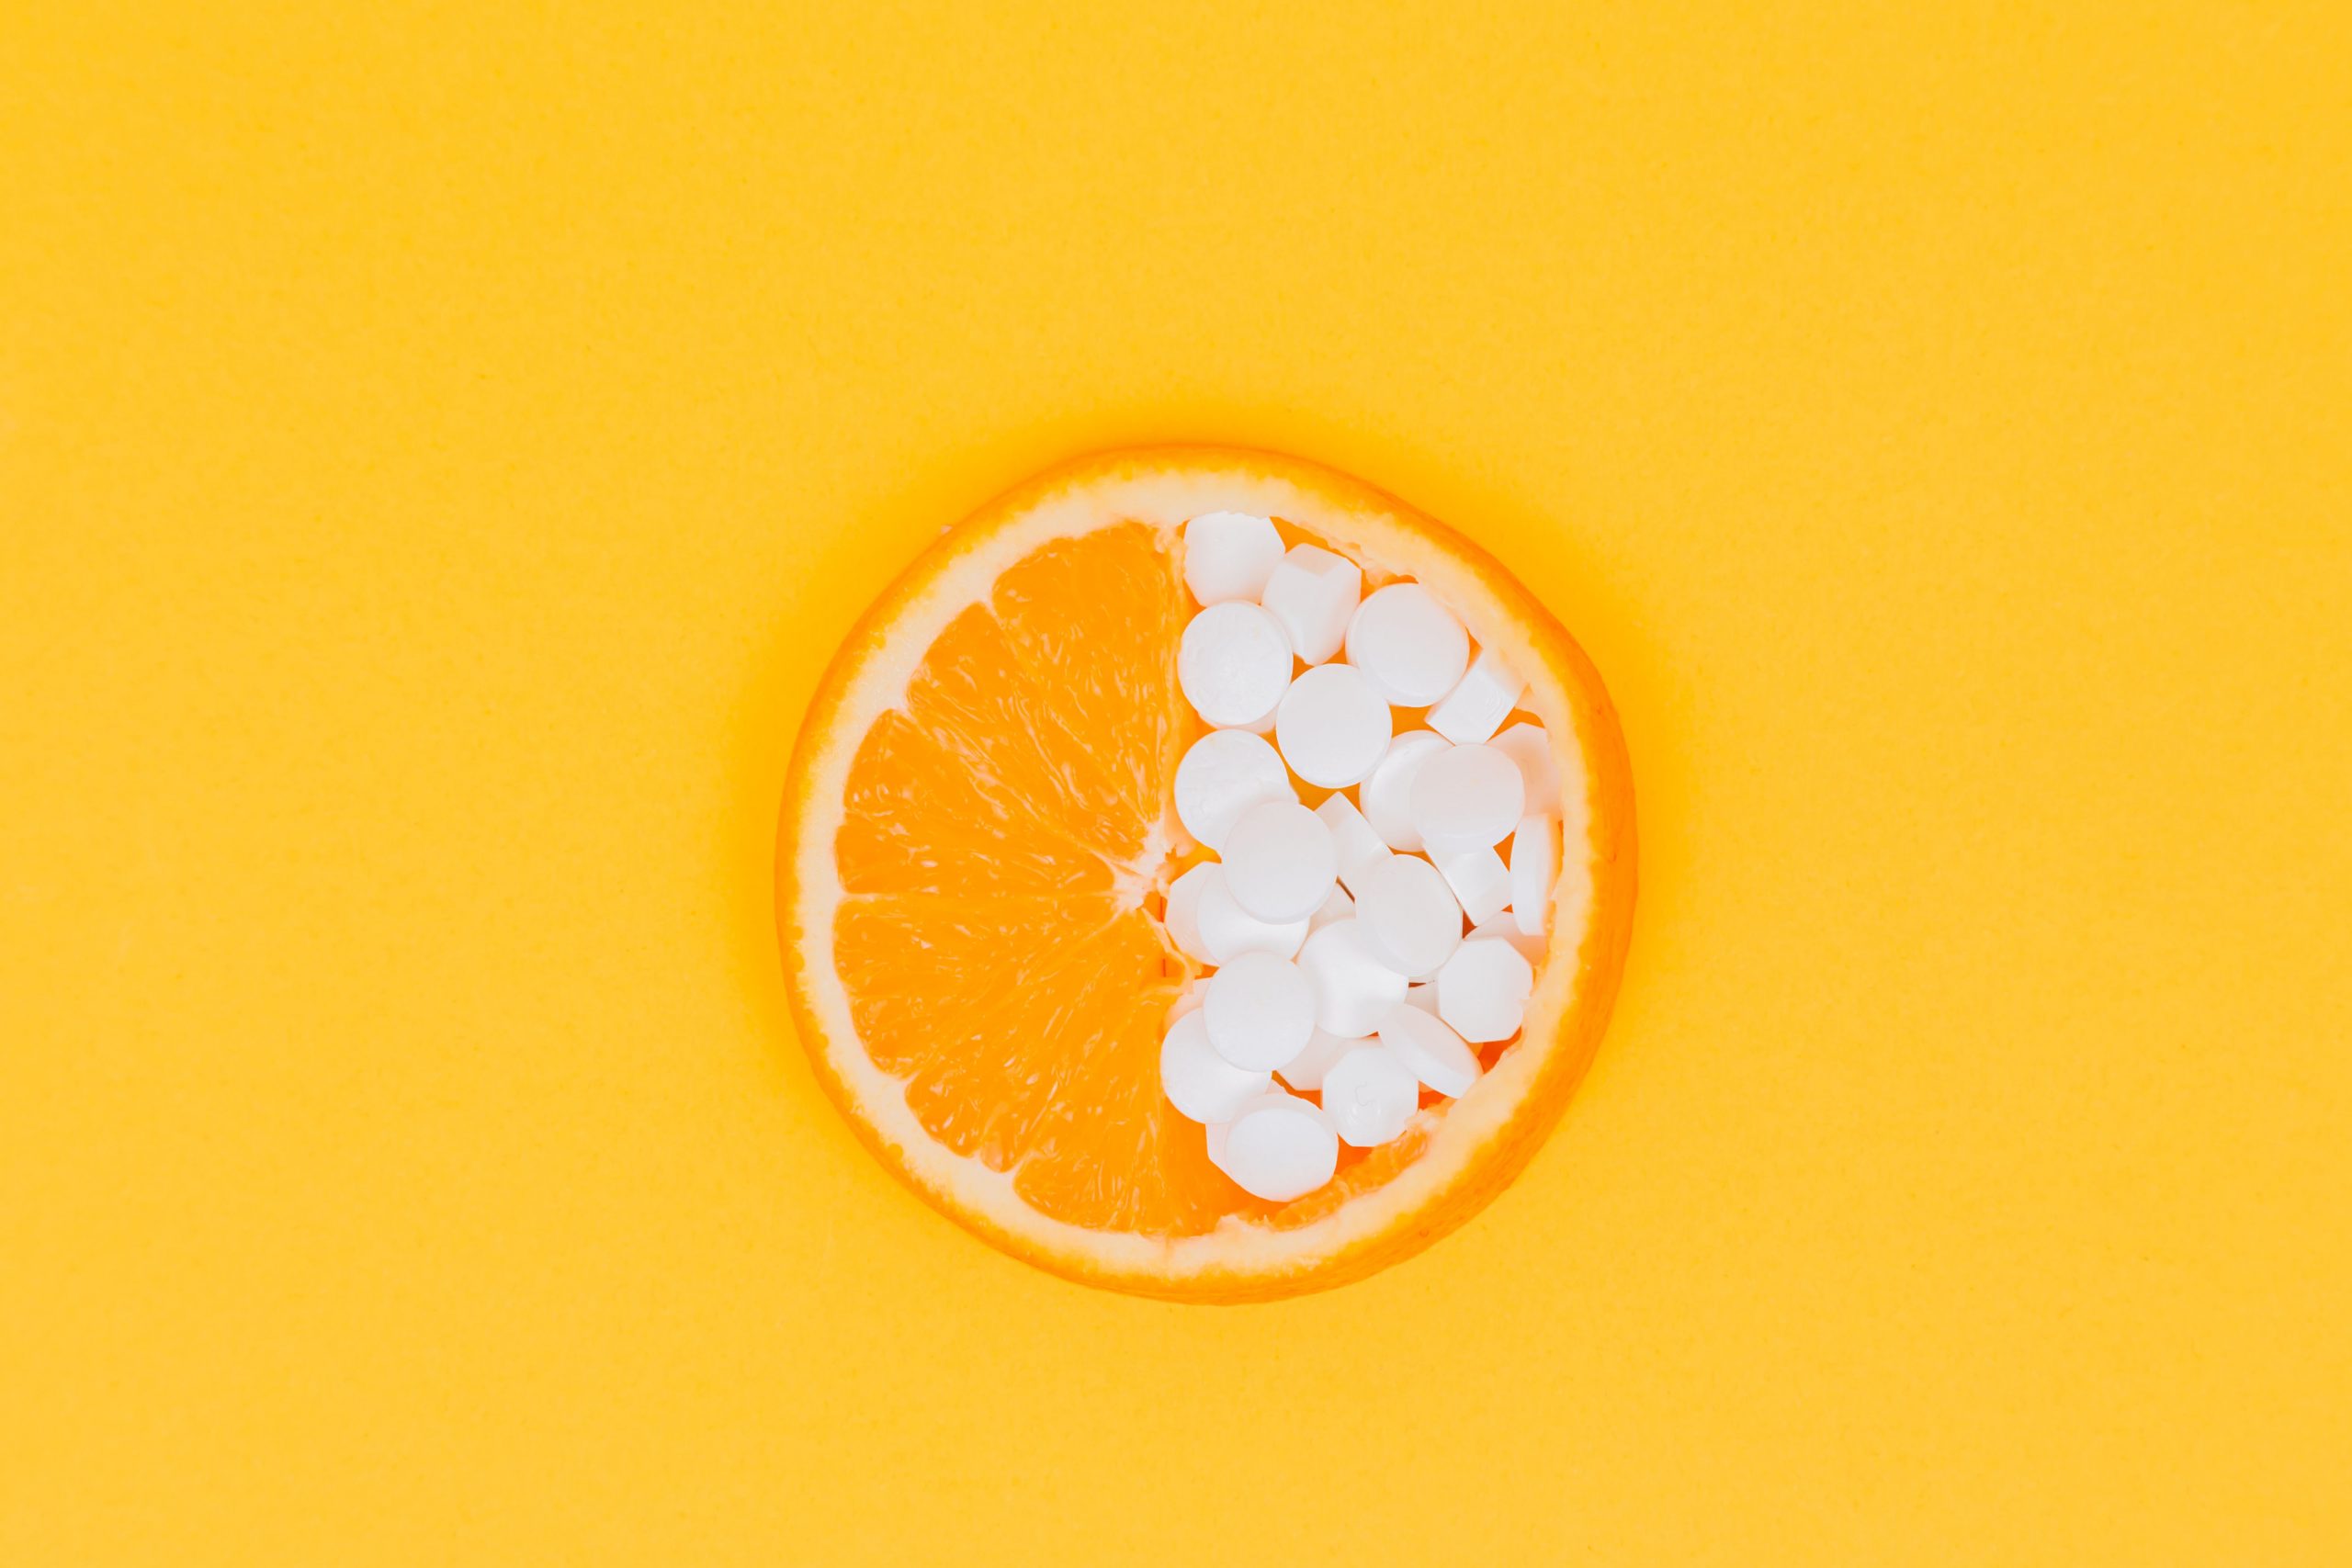 The Close Plan. A Slice Of Orange, Lemon Lies Half Filled With Pills, Vitamins On A Yellow, Orange Background. Vitamin C. Medicine. Creativity. Vitamins. Pills. Place For An Inscription. Advertising.